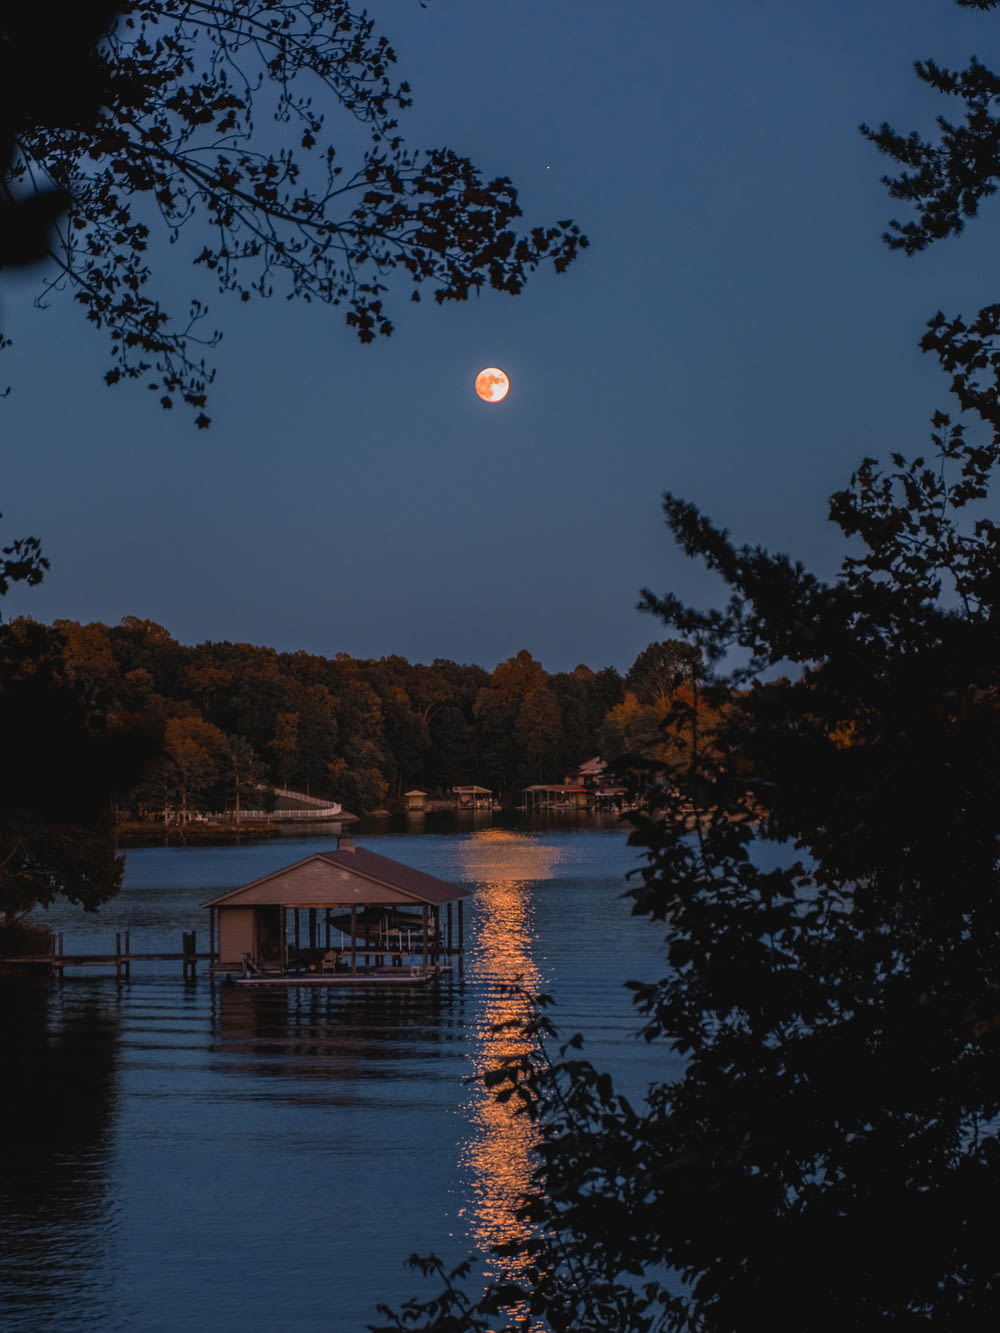 a house on a dock in a lake with trees and a moon in the sky